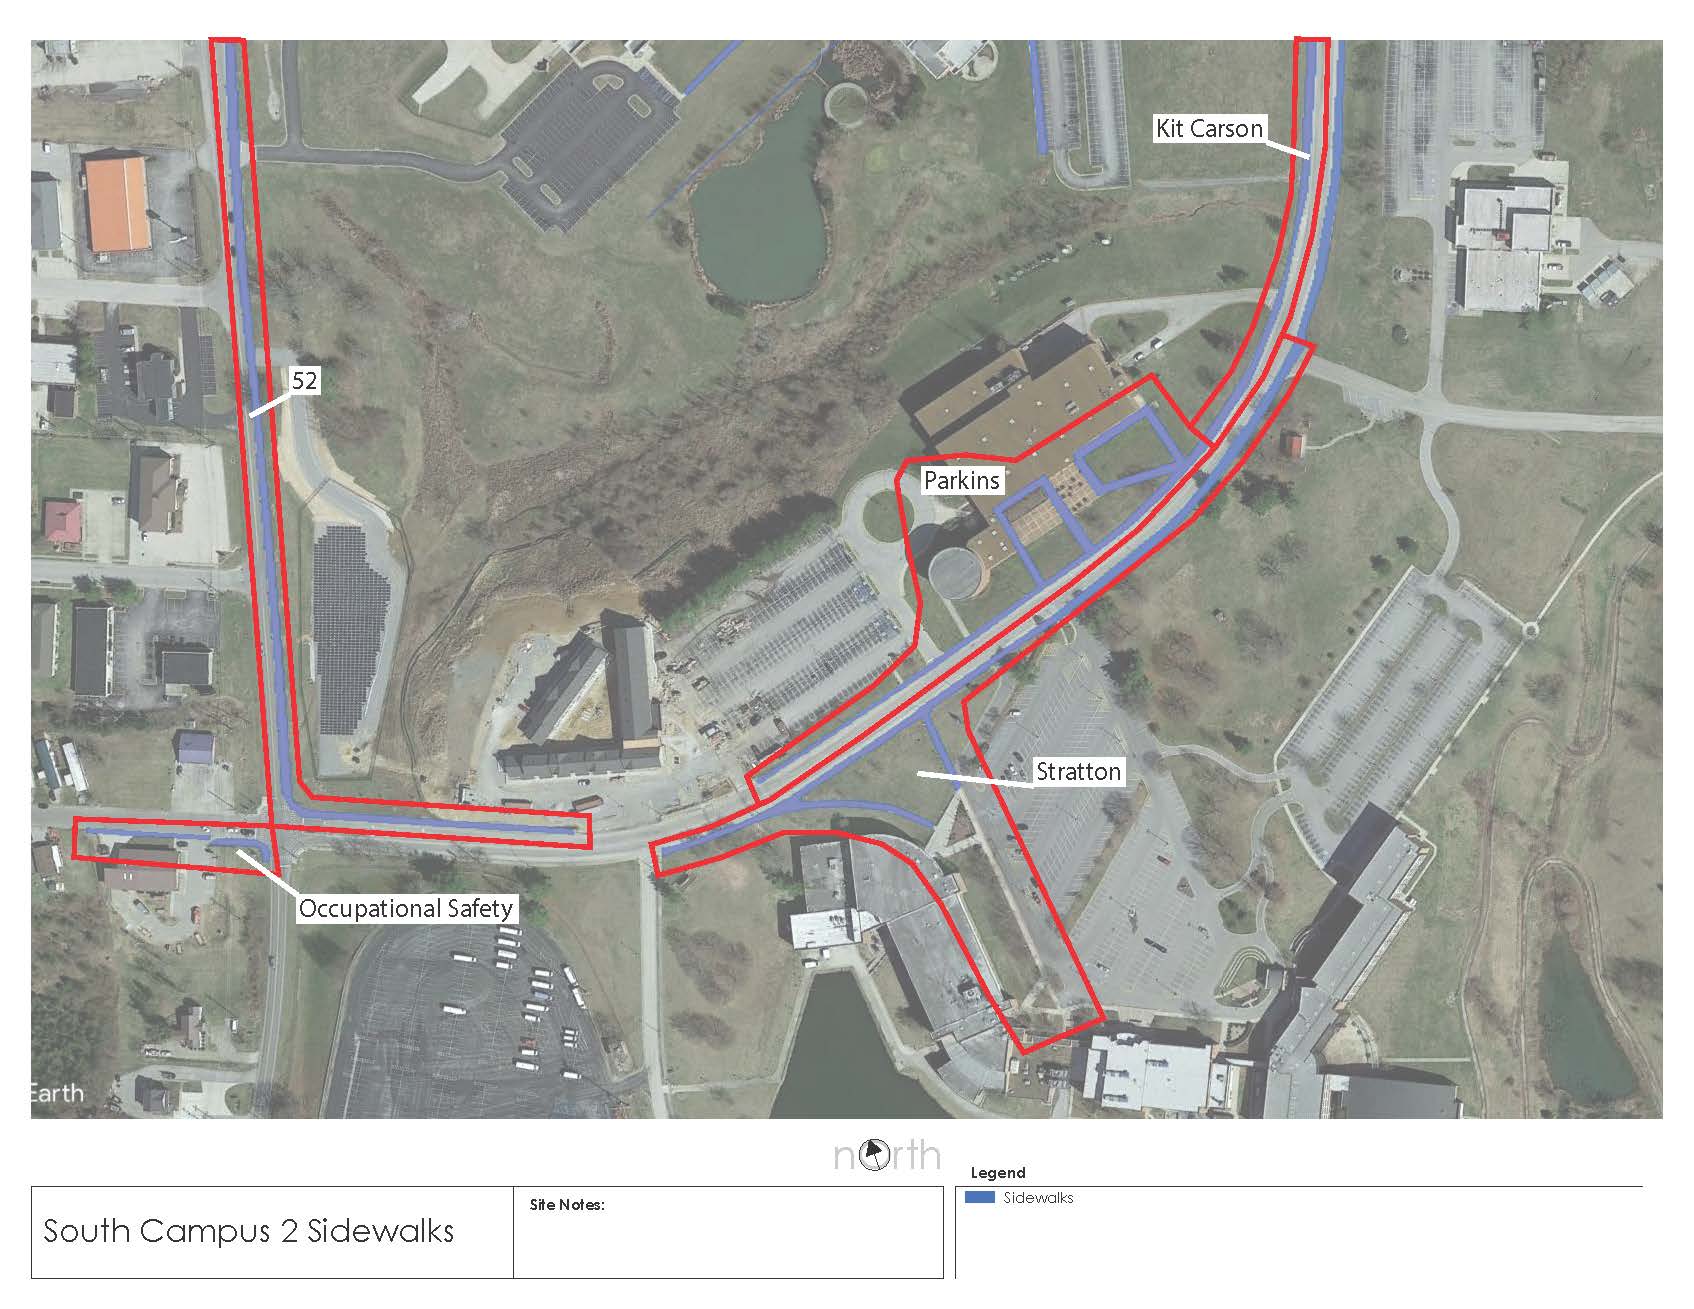 The snow and ice removal plan for South Campus sidewalks at Eastern Kentucky University.